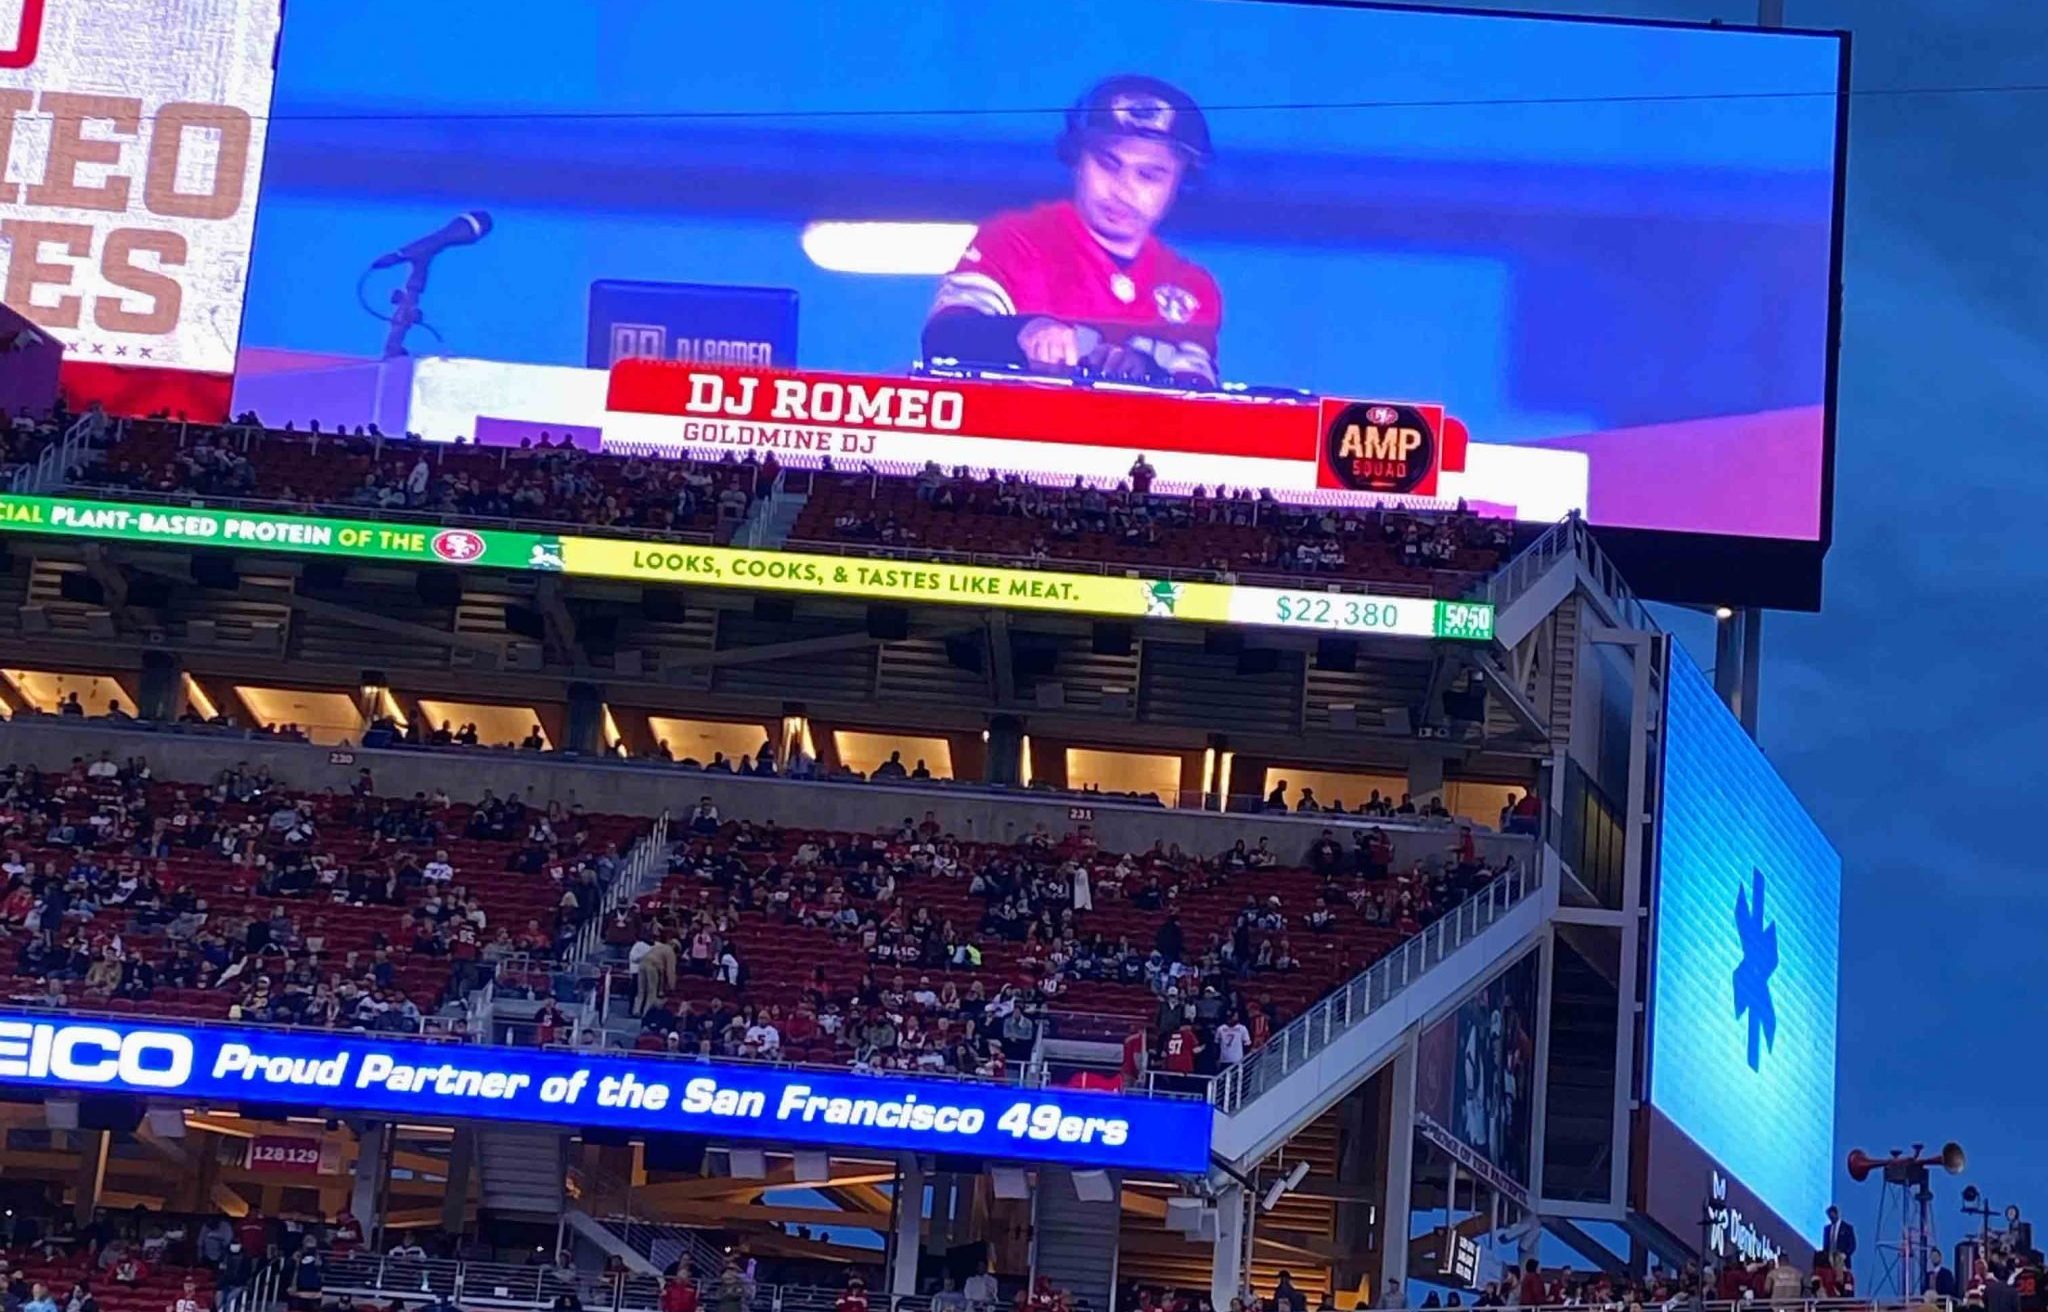 DJ Romeo has Announced his Return for a Seventh Season as the San Francisco 49ers' official in-game DJ